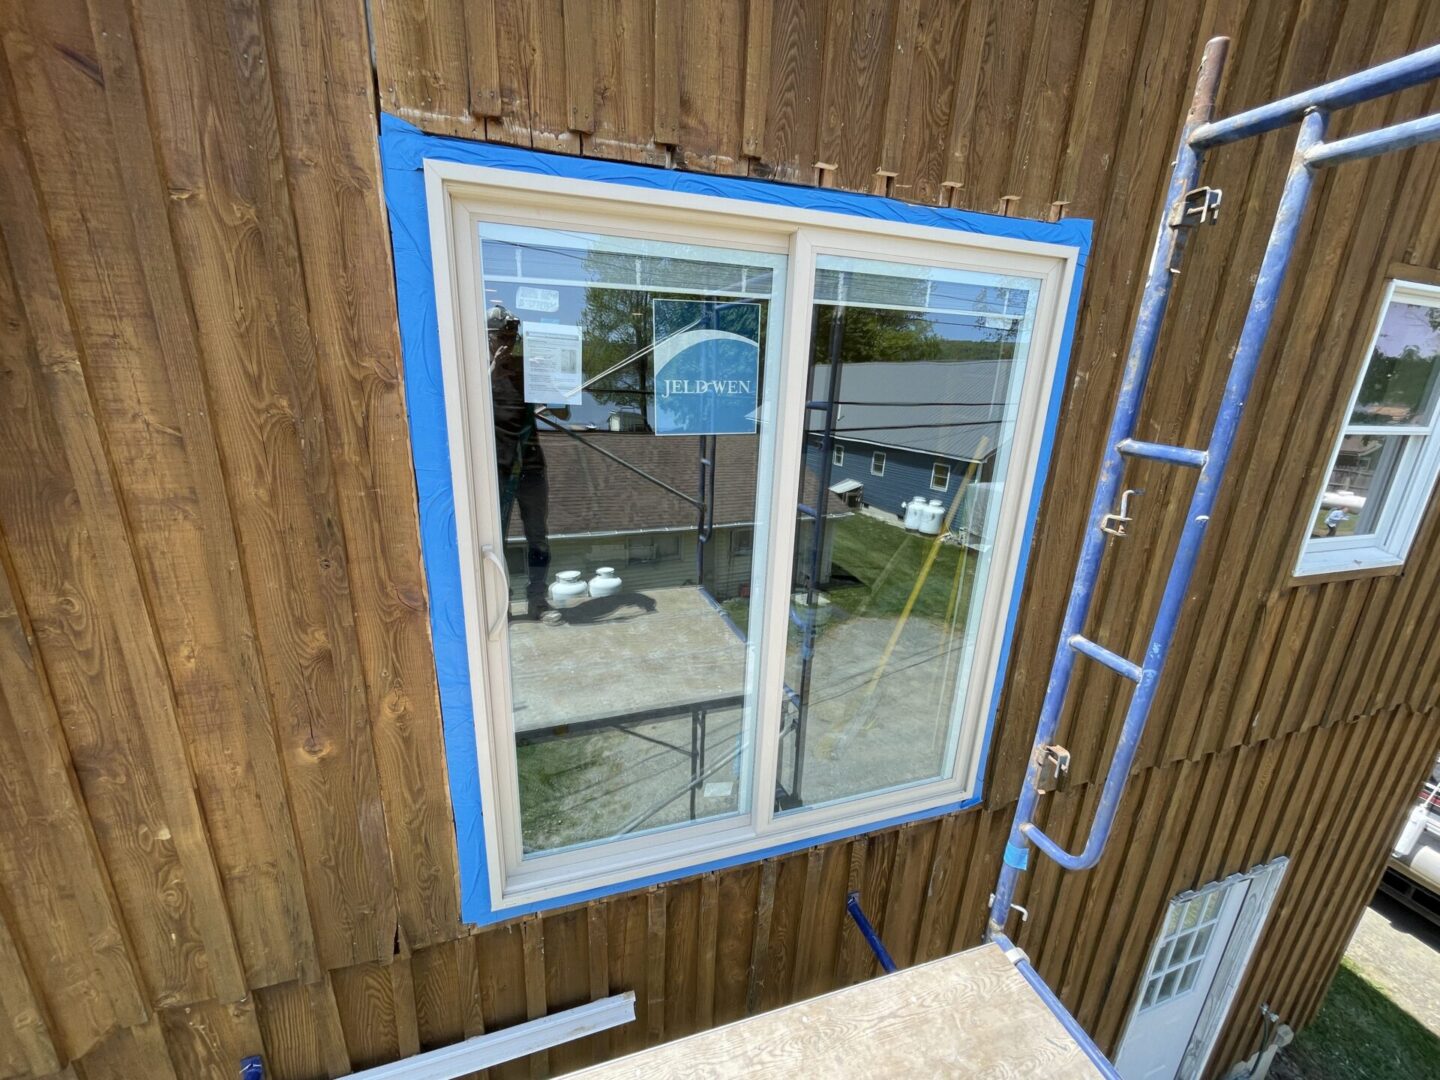 A window being painted in the process of being installed.